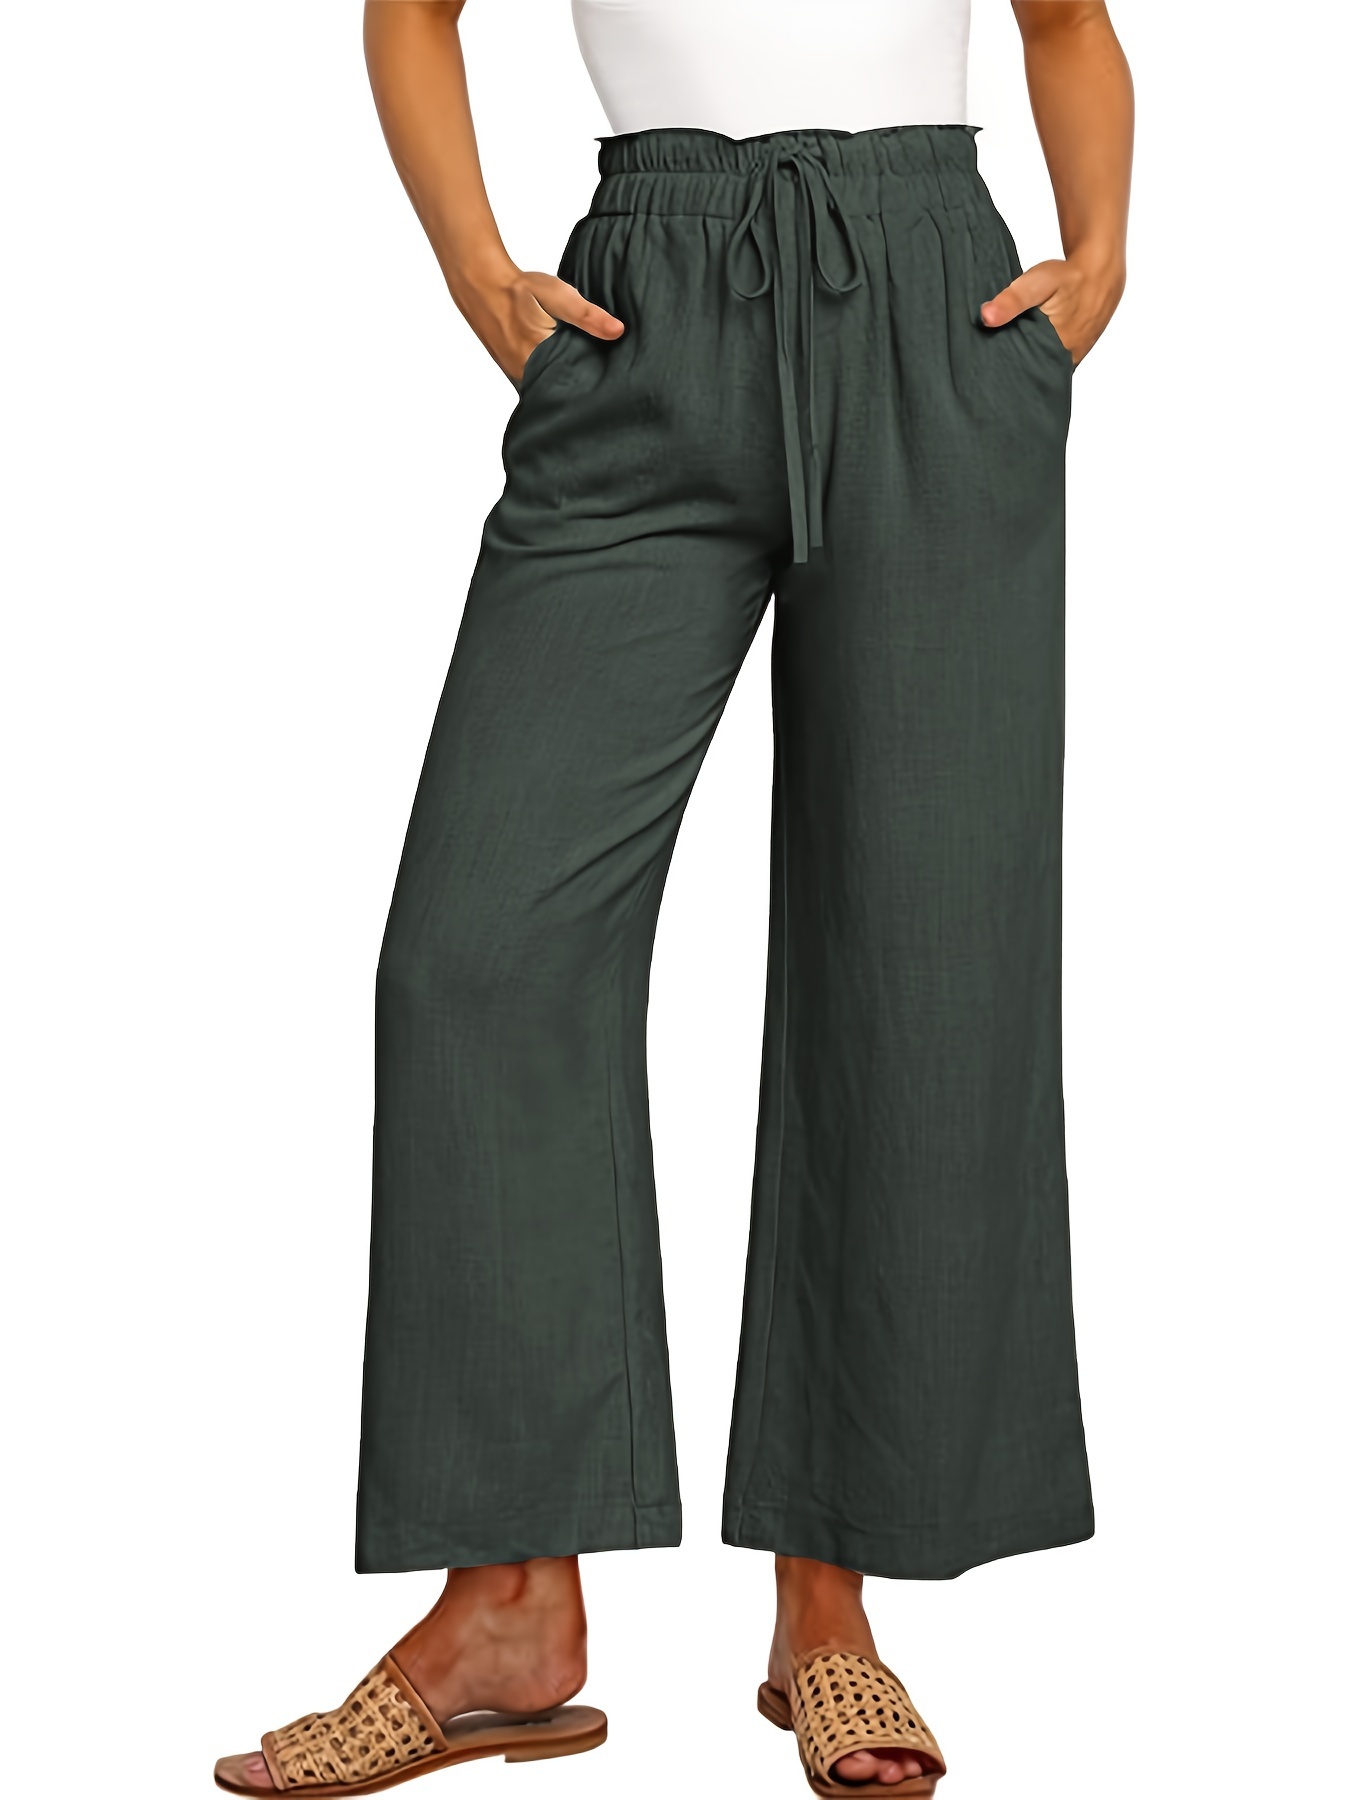 Wide Legged Linen Trousers With Belt and Pockets, High Waisted